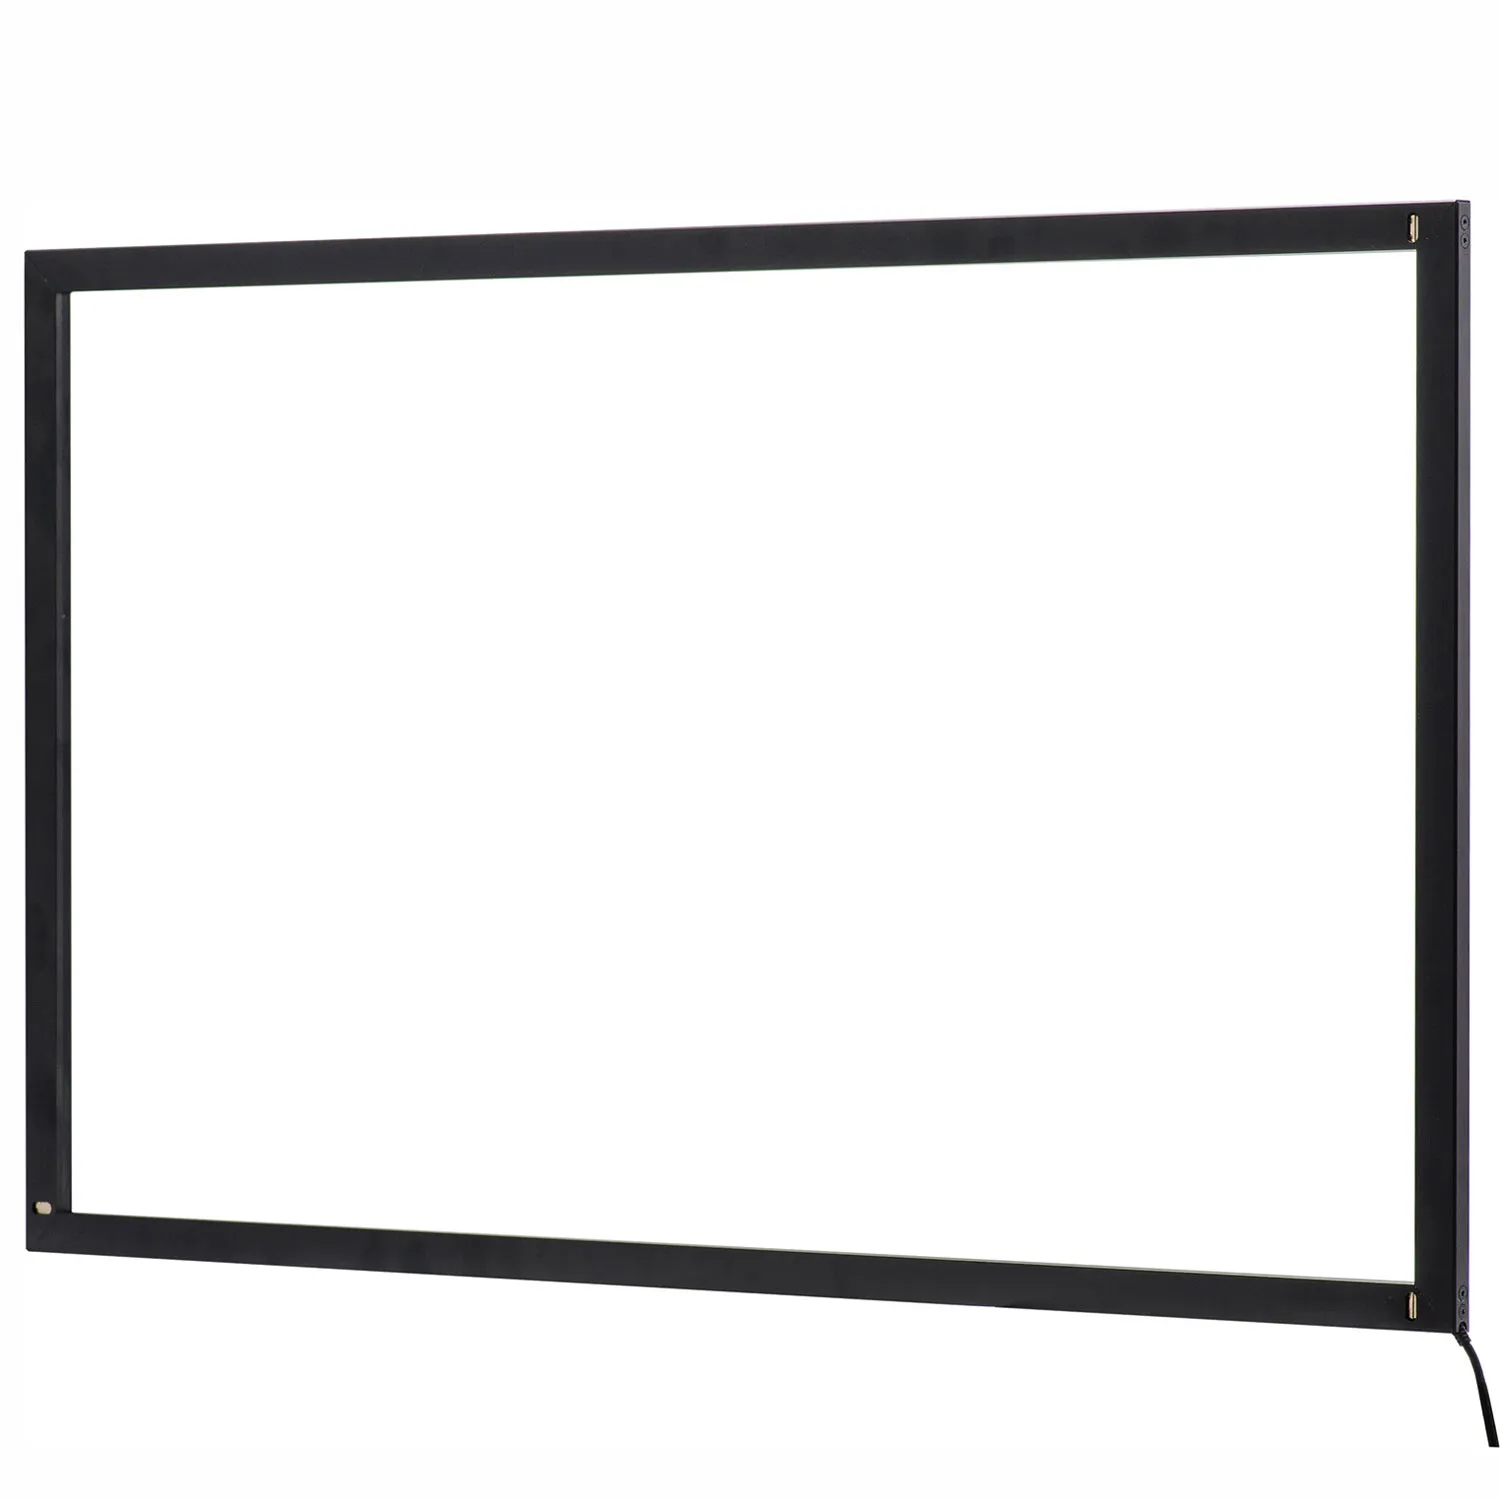 Touch frame Keetouch GmbH 65" KP-650-IP0S001